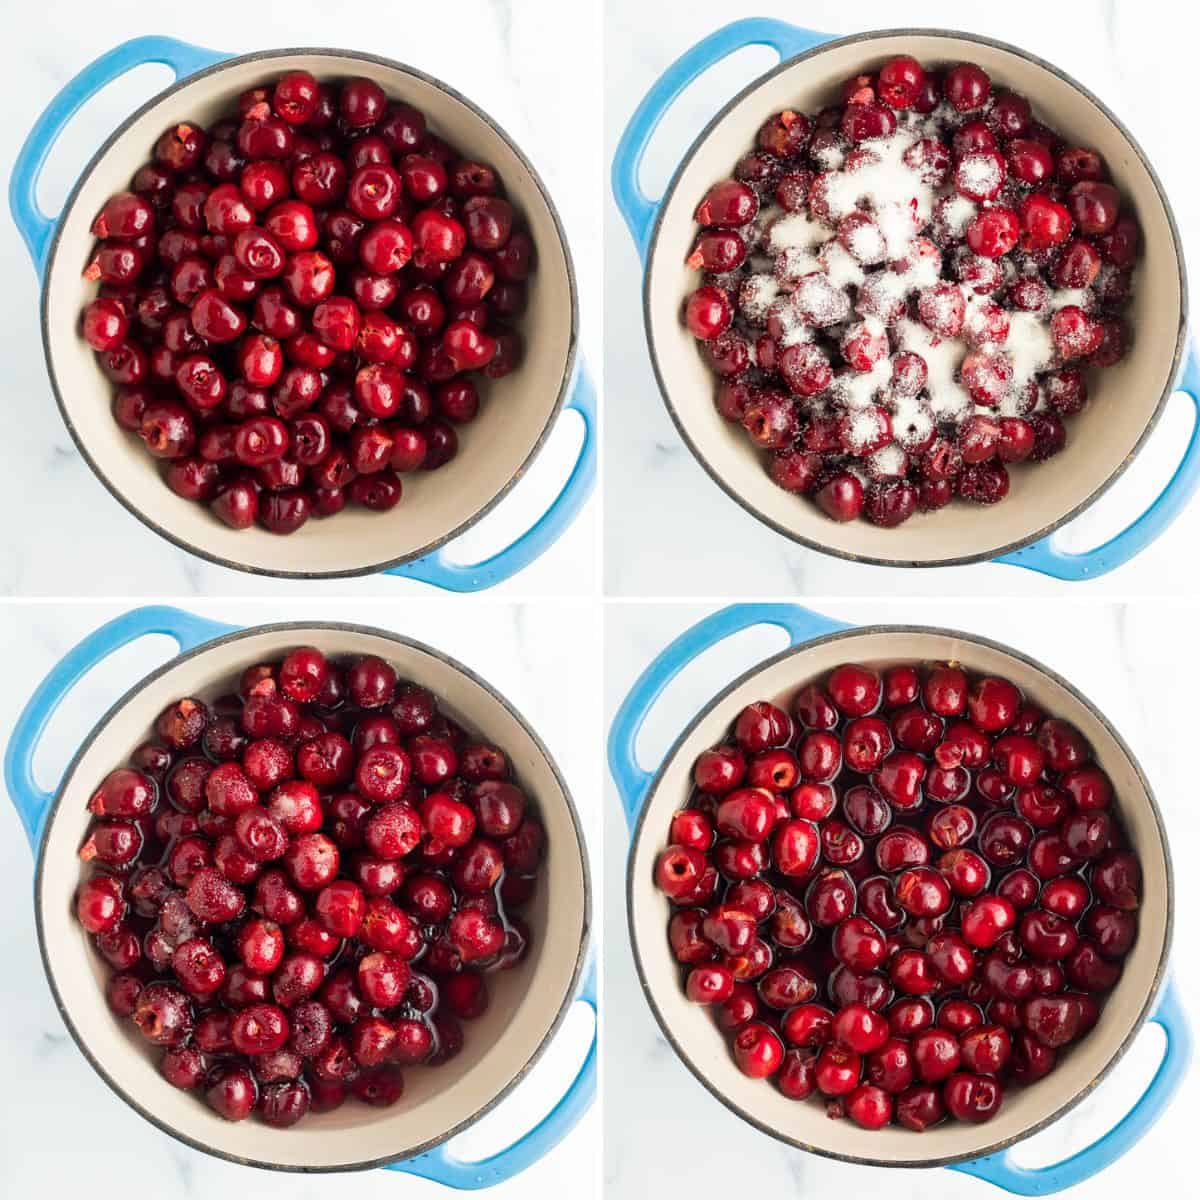 4 photos showing cherries in a blue casserole dish.